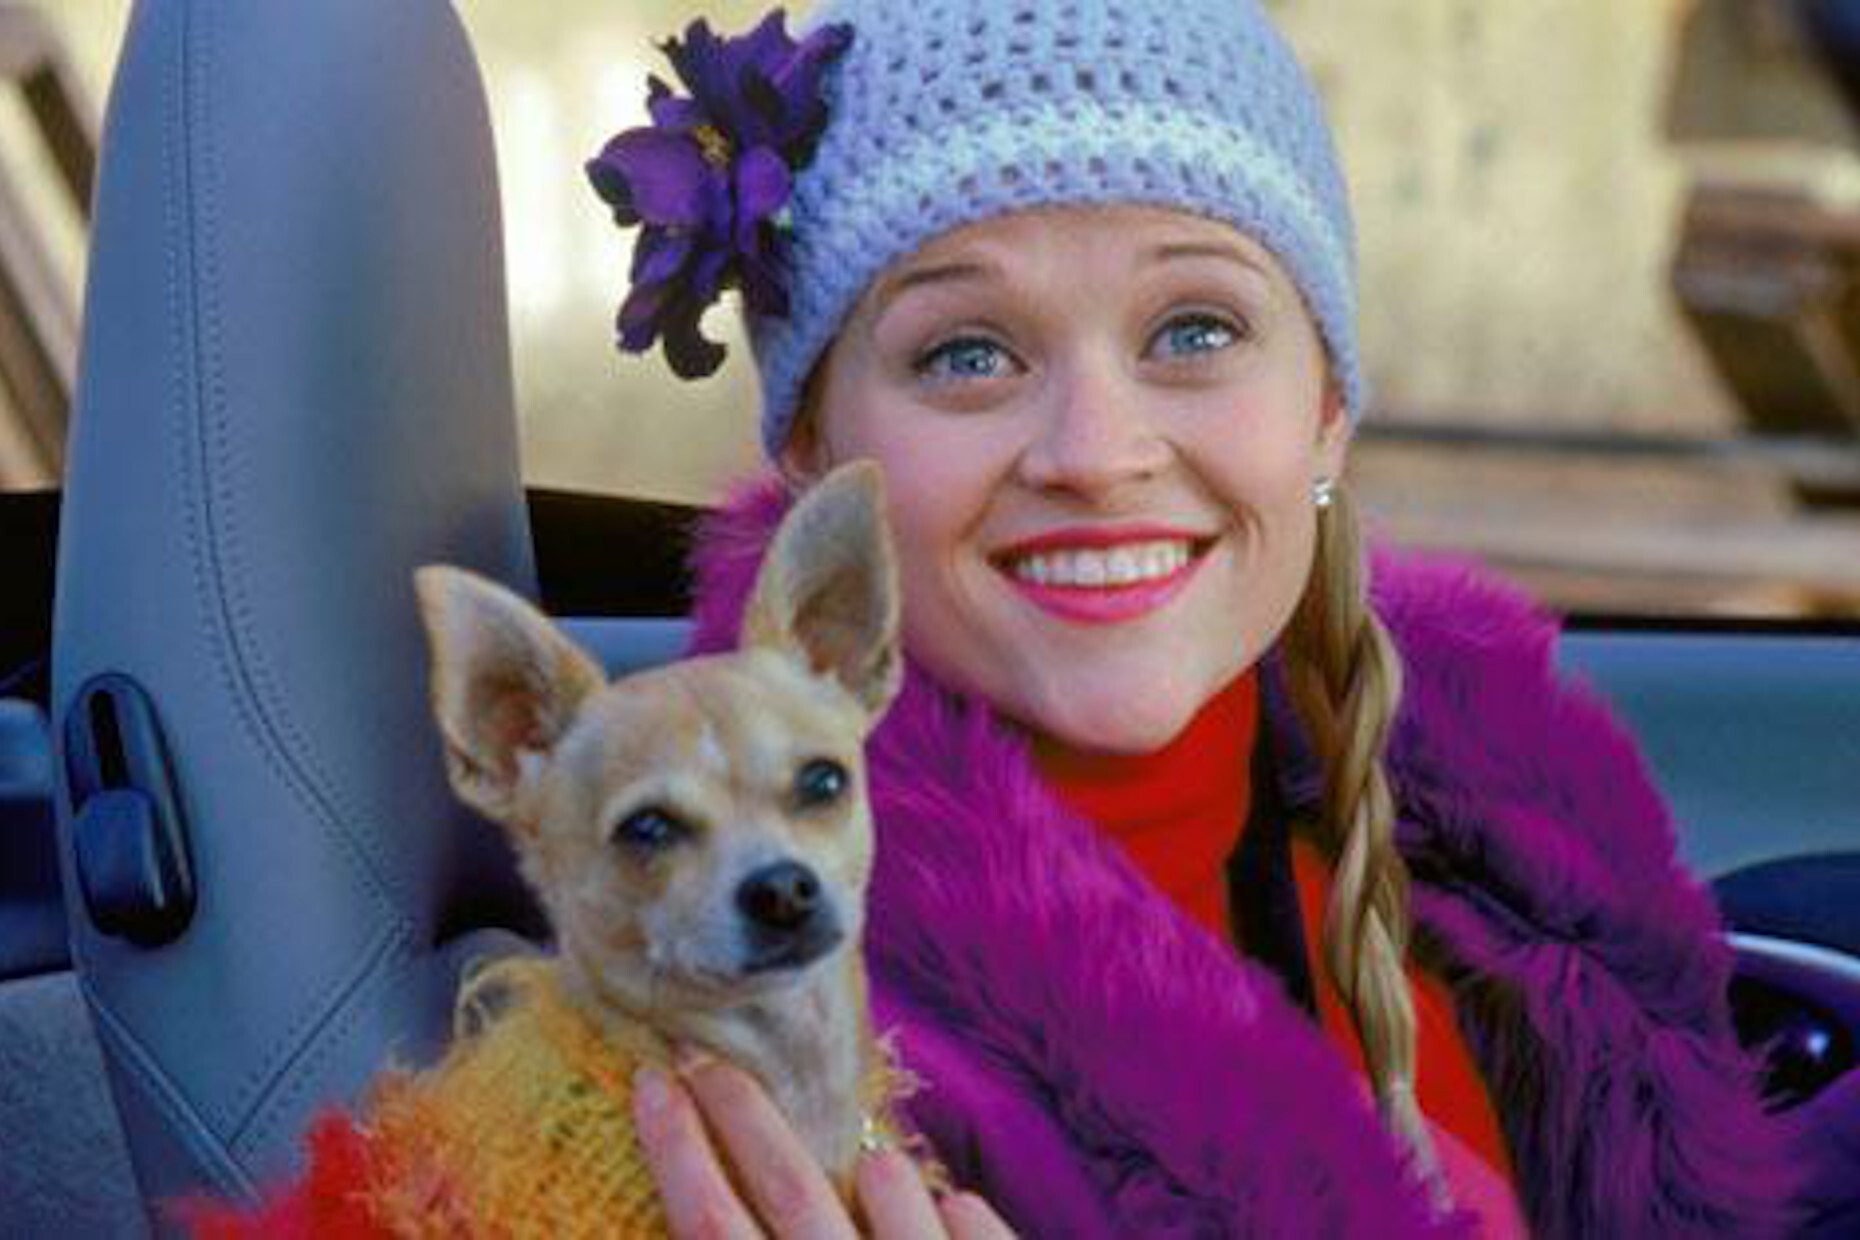 <p>It's hard not to picture Reese Witherspoon when you hear the title <a href="https://www.imdb.com/title/tt0250494/?ref_=nv_sr_srsg_0" title="https://www.imdb.com/title/tt0250494/?ref_=nv_sr_srsg_0"><em>Legally Blonde</em></a><em>, </em>but the <a href="https://www.goodreads.com/book/show/386142.Legally_Blonde?ac=1&from_search=true&qid=8kT8FssRc1&rank=1" rel="noreferrer noopener">plot appeared first as a book</a> based on<a href="https://www.insider.com/legally-blonde-facts-2019-1" title="https://www.insider.com/legally-blonde-facts-2019-1"> a true story</a> by Amanda Brown. Many of the books reviews are from readers who revisited the story because they loved the movie. In the book, Elle goes to <a href="https://www.refinery29.com/en-us/2016/12/133903/legally-blonde-book-elle-woods-harvard" title="https://www.refinery29.com/en-us/2016/12/133903/legally-blonde-book-elle-woods-harvard">Stanford, not Harvard</a>, and her character is a <a href="https://www.cracked.com/article_29598_elle-woods-terrible-person-in-novel-legally-blonde-was-based-on.html" title="https://www.cracked.com/article_29598_elle-woods-terrible-person-in-novel-legally-blonde-was-based-on.html">lot less likable</a>, which could be part of the reason why fans tend to flock to the viewing rather than the reading experience for this one.</p>